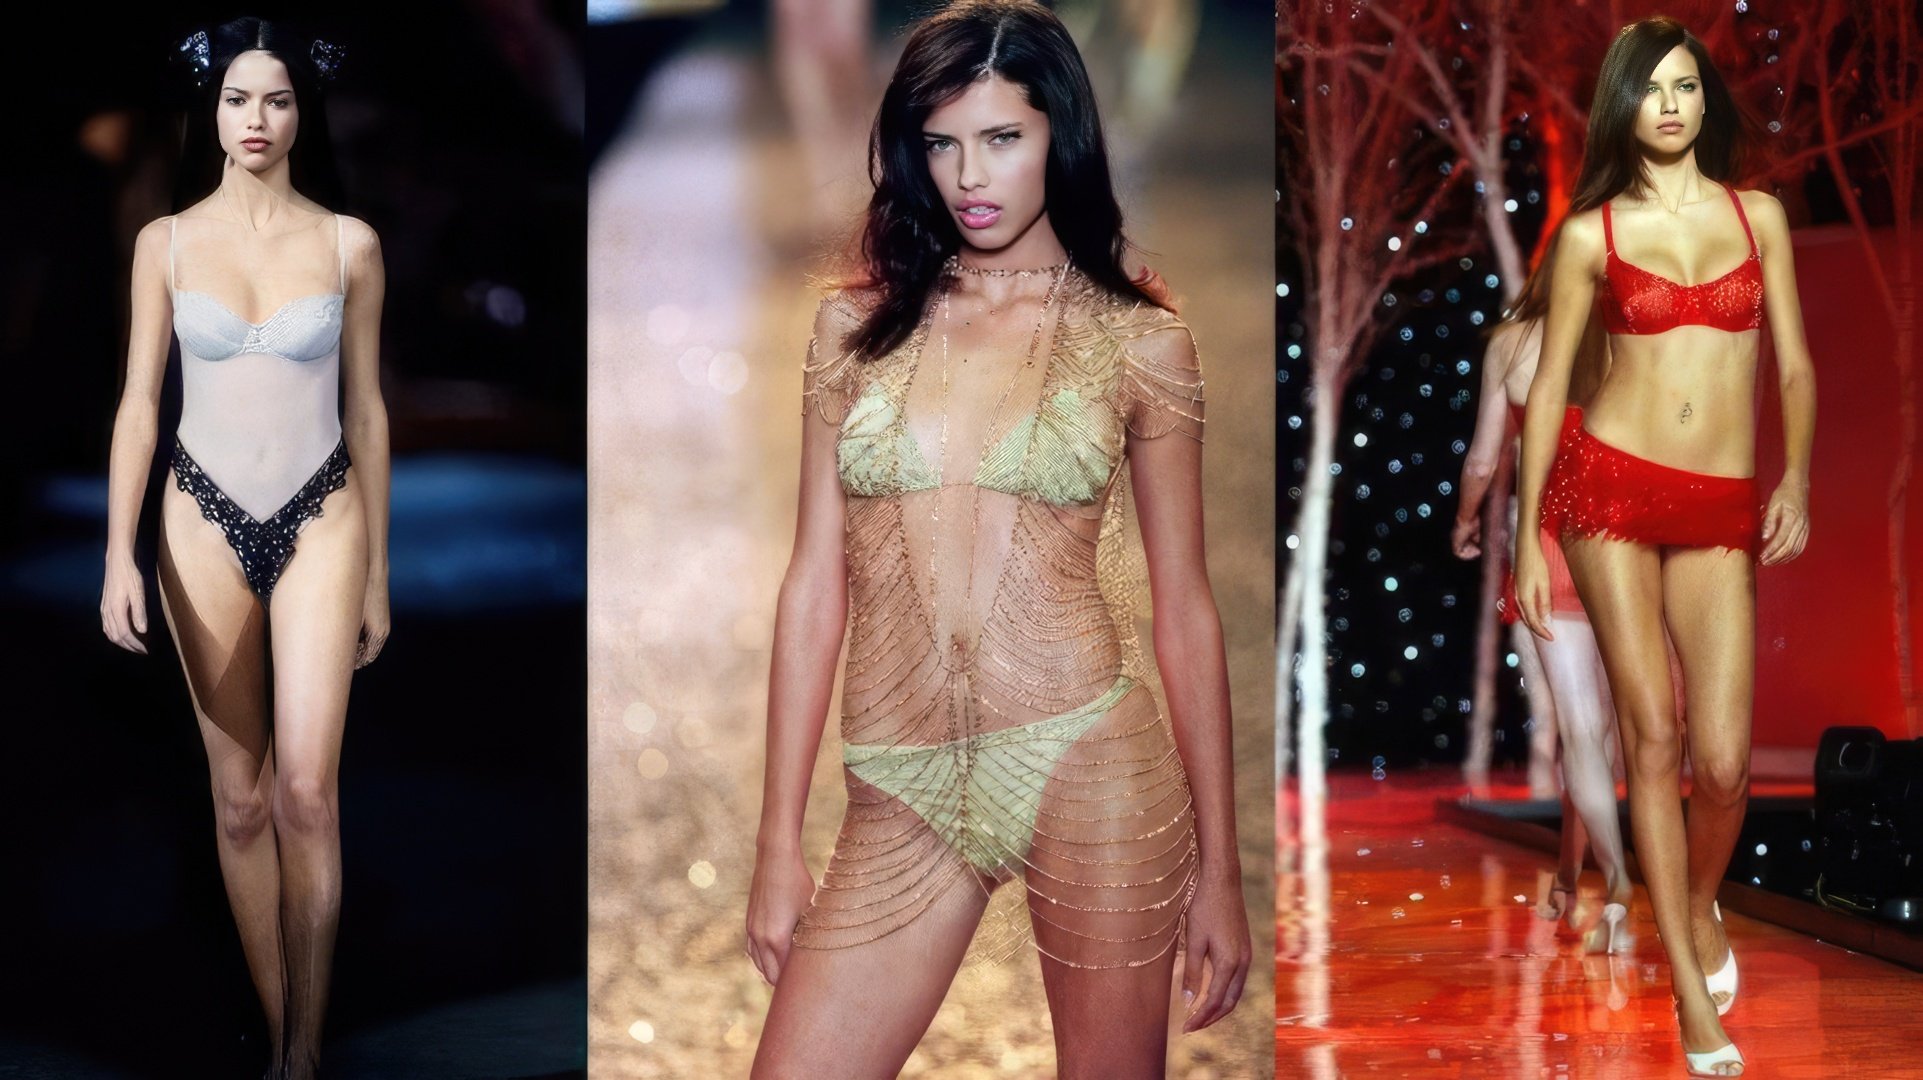 Adriana Lima in 1999, 2000, and 2001